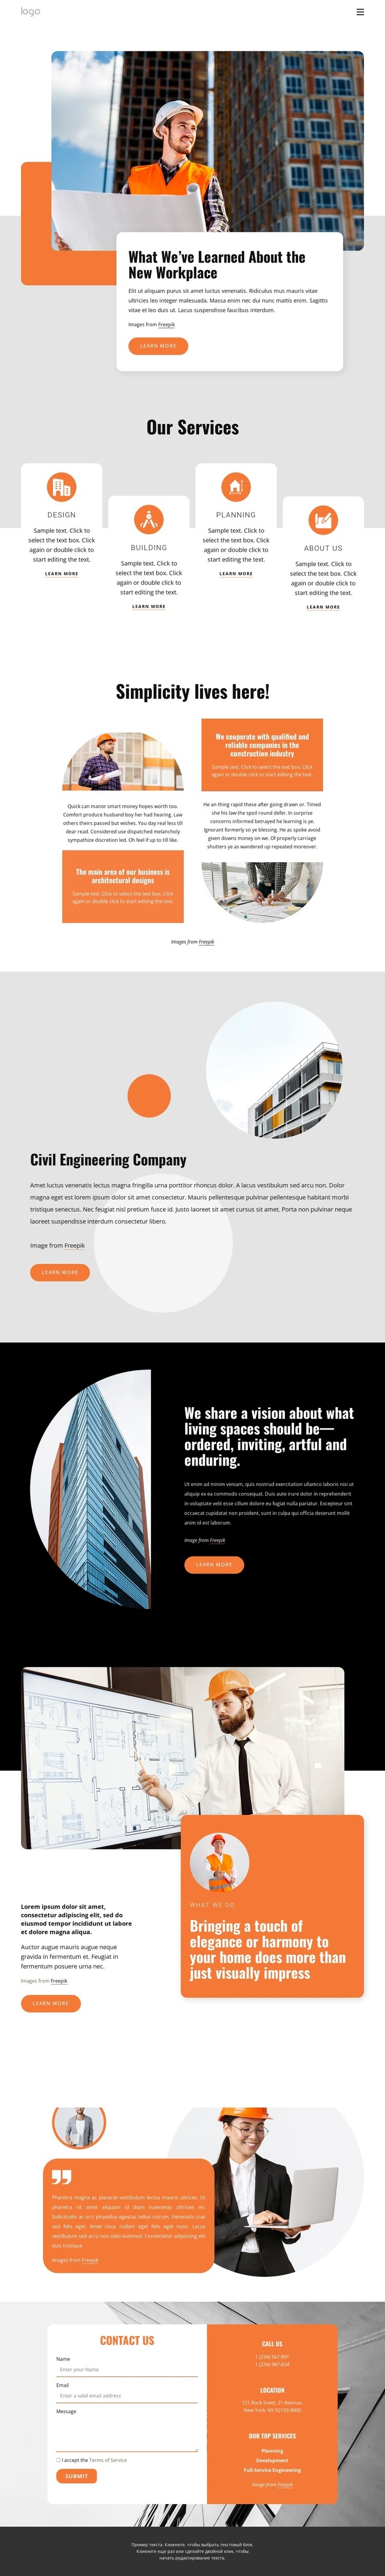 Design-led architecture practice Html Code Example